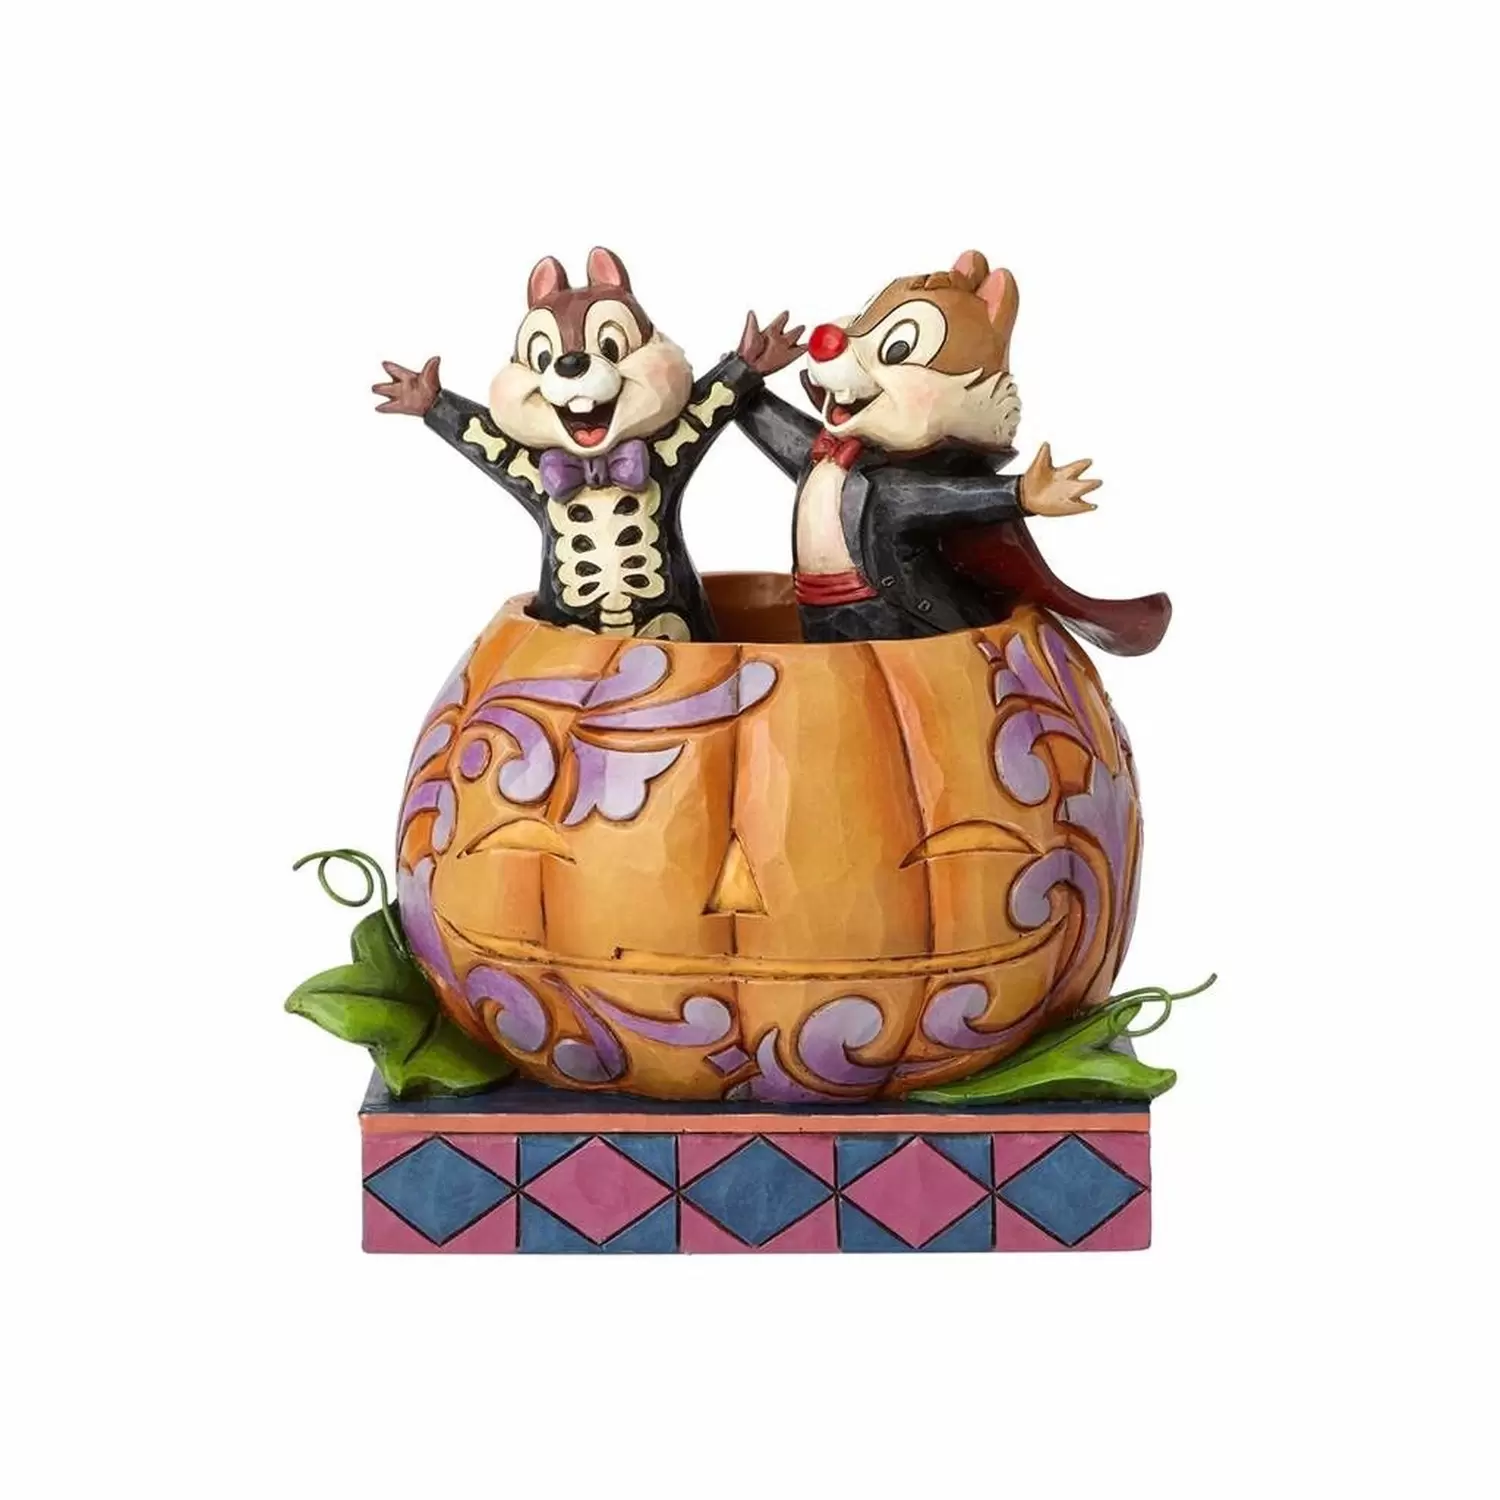 Disney Traditions by Jim Shore - Tiny Tricksters - Chip & Dale in Pumpkin